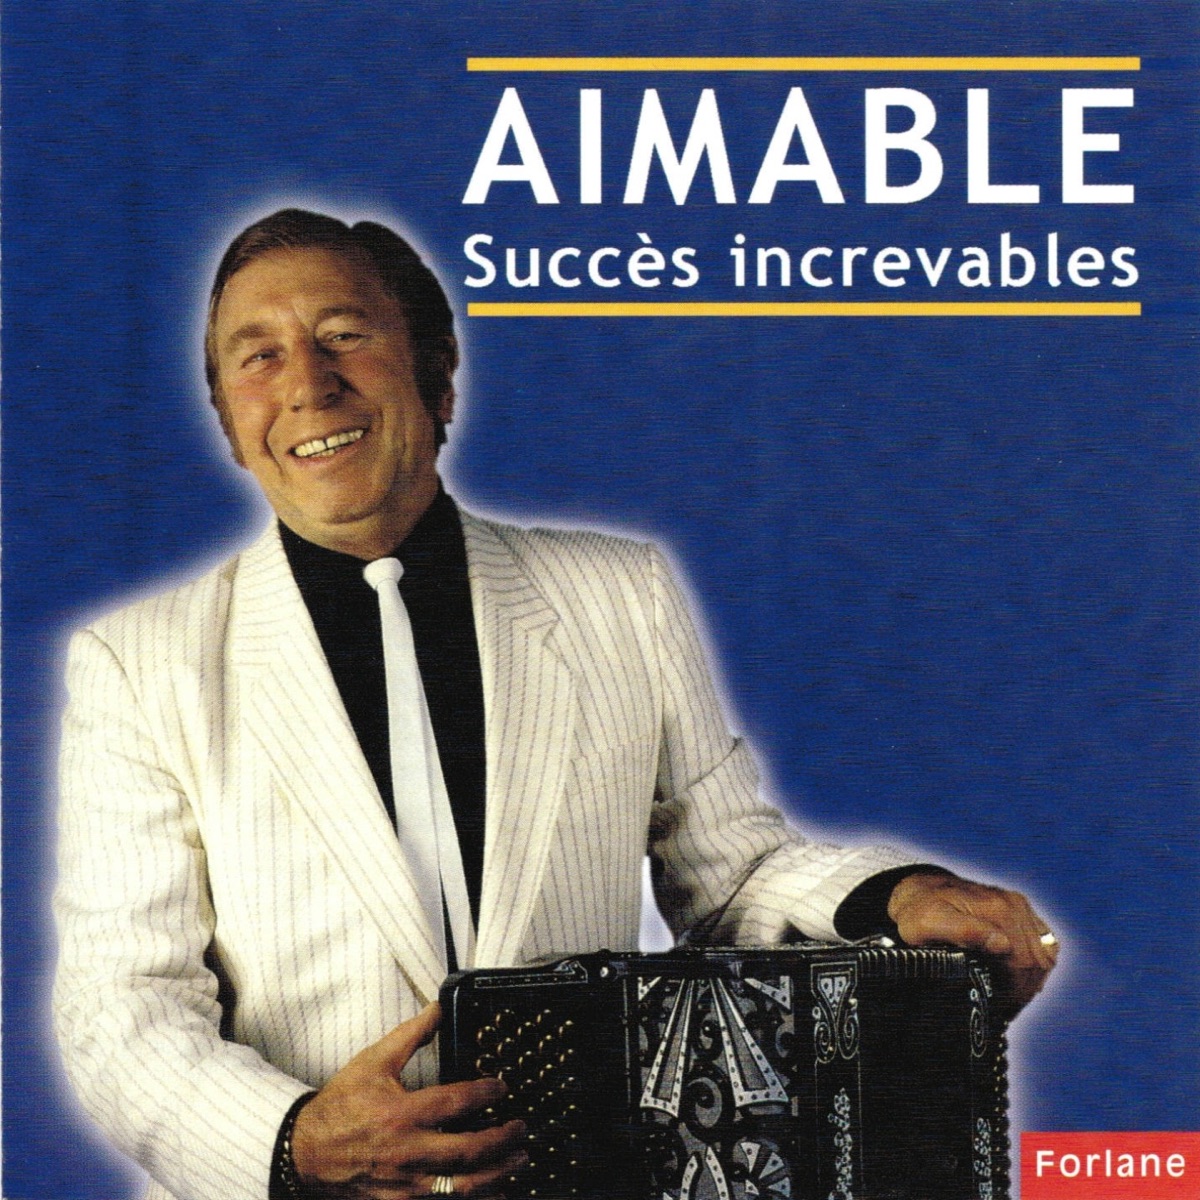 Aimable : Succès increvables by Aimable on Apple Music